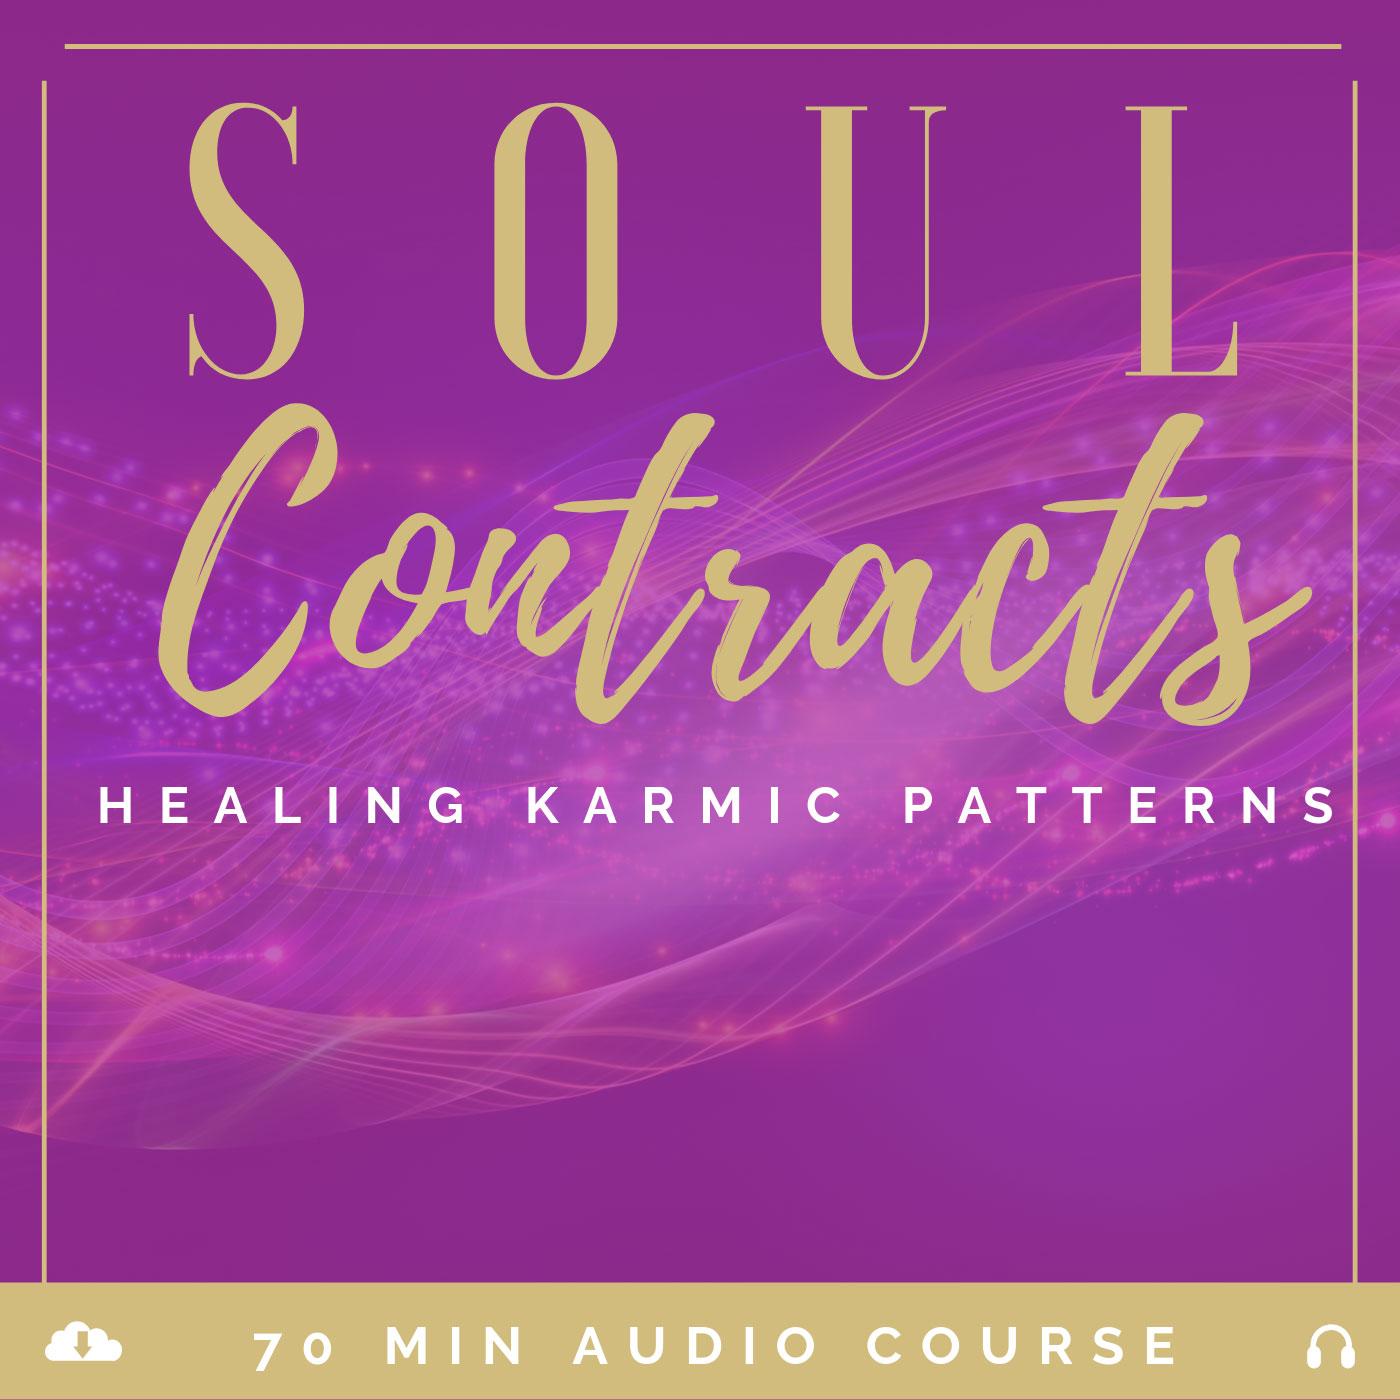 soul contracts